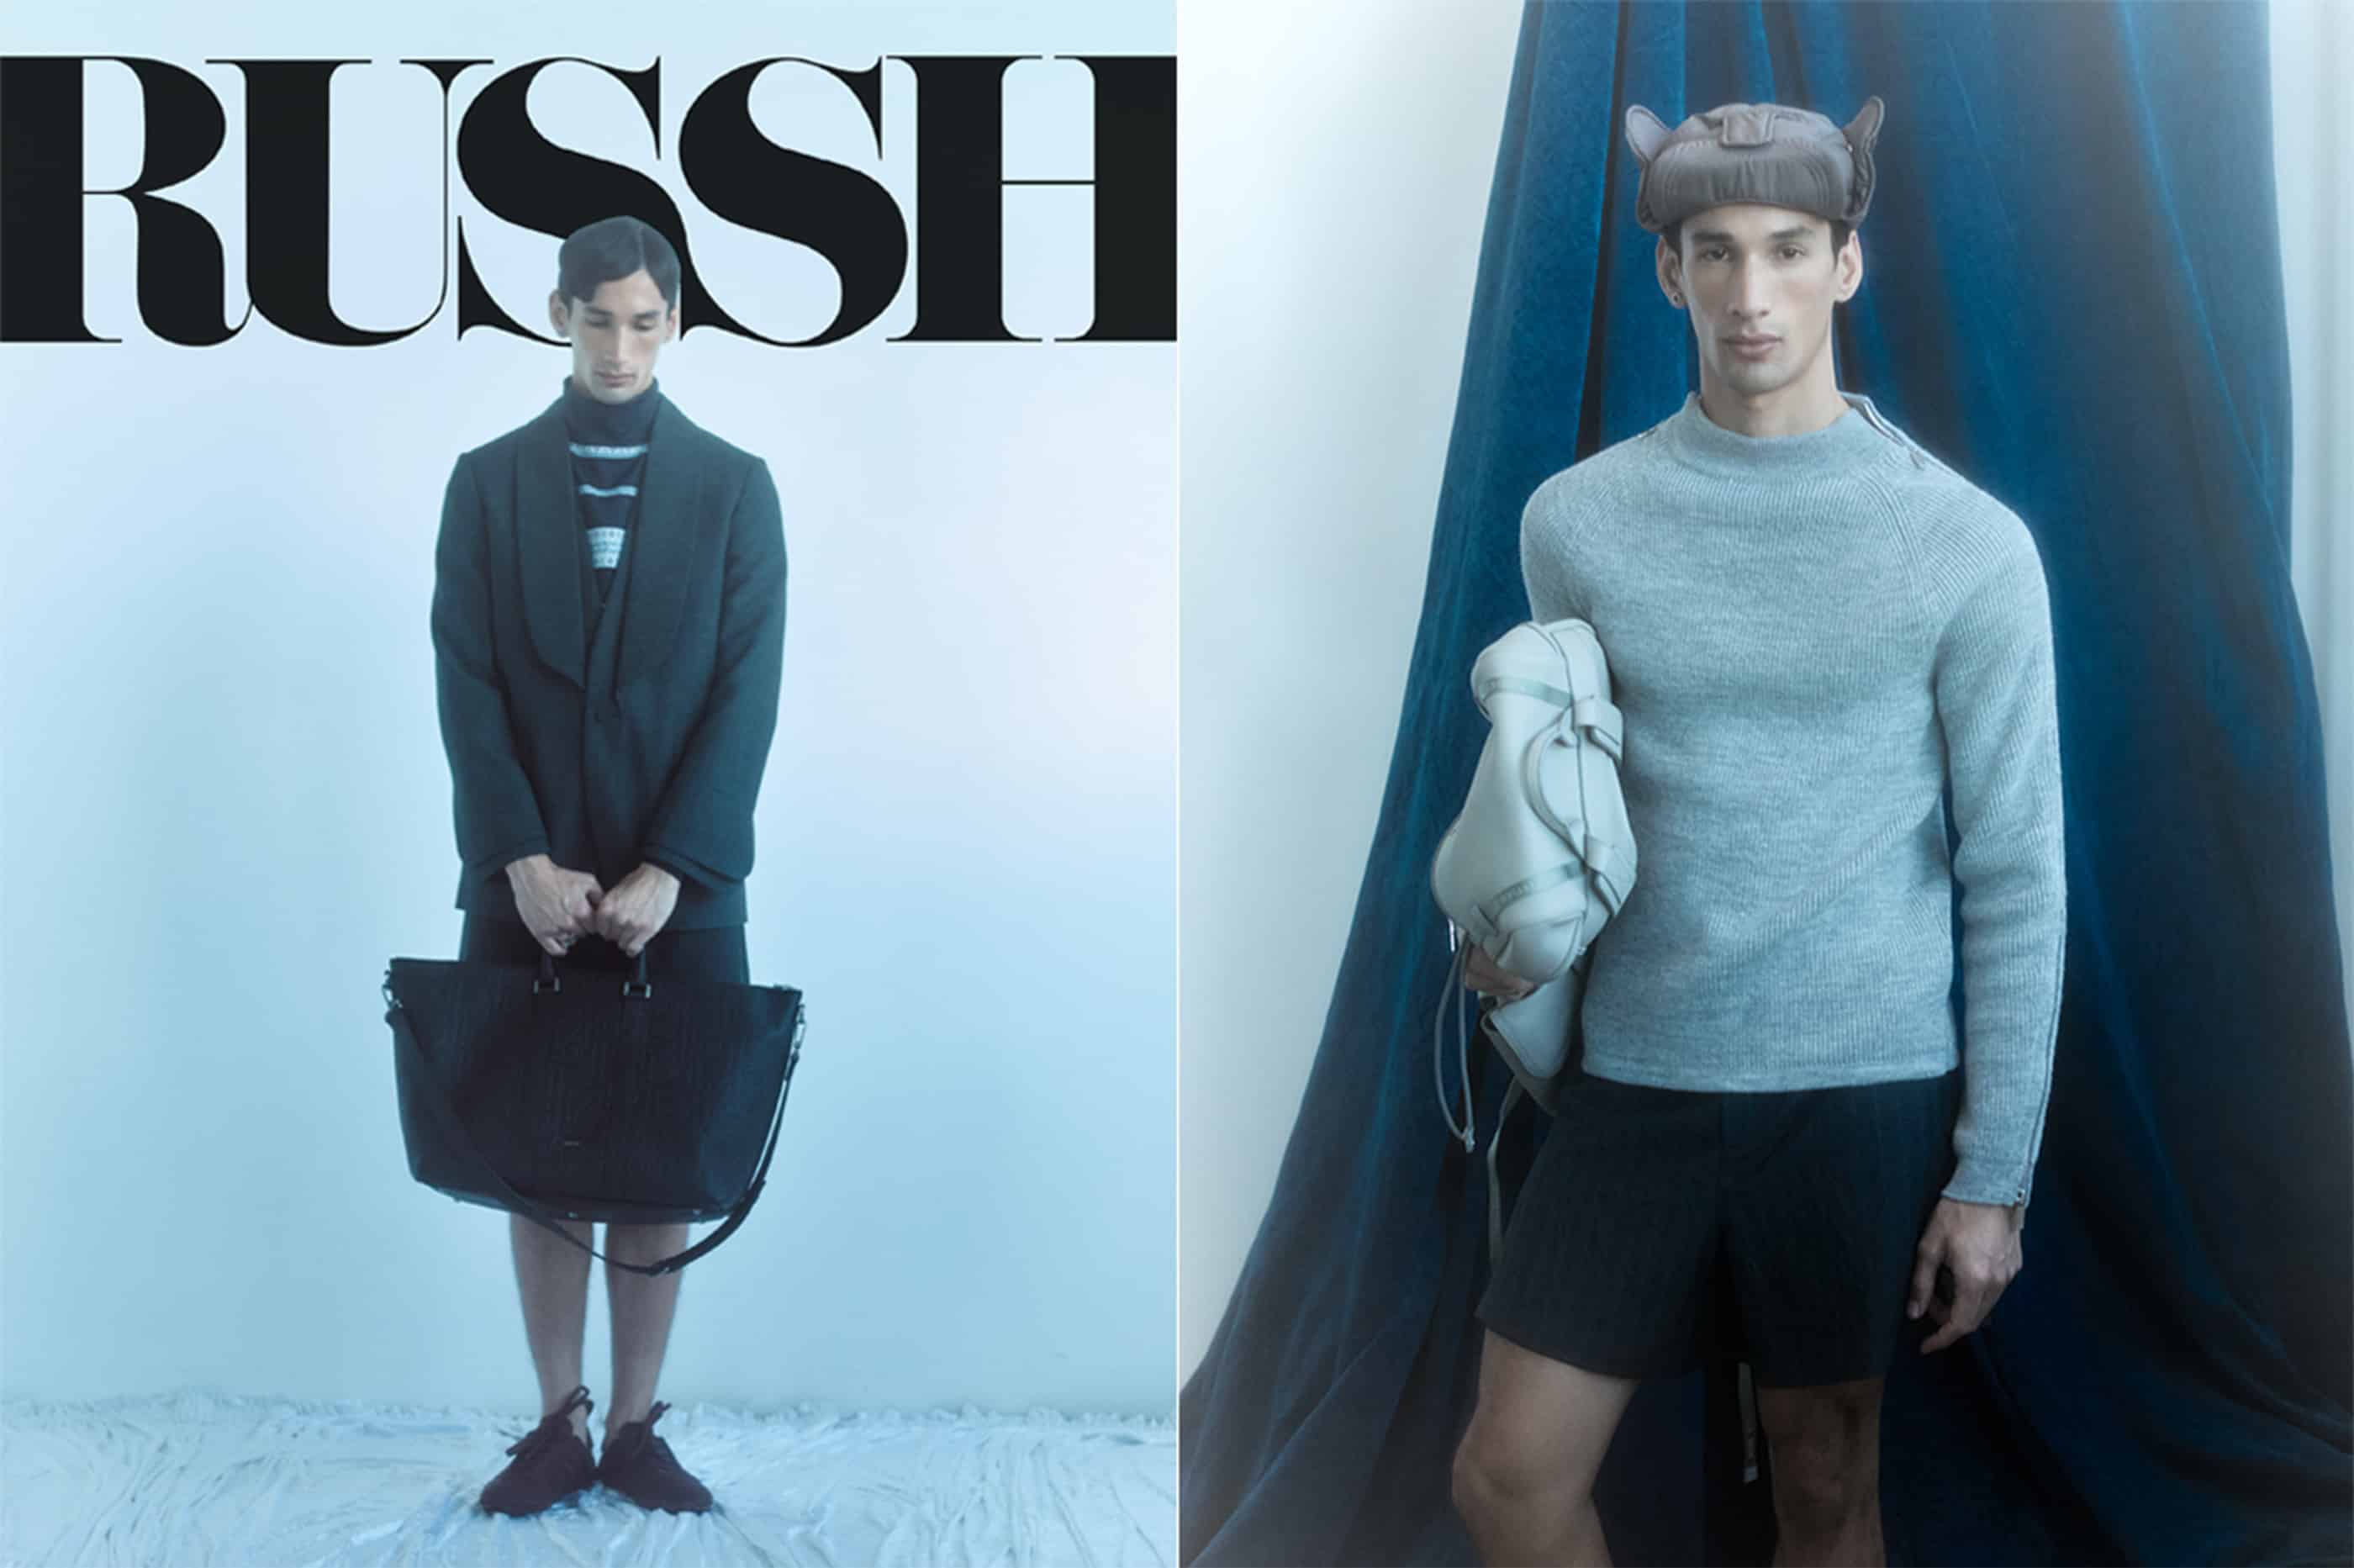 Dior Men give a lesson in outwear dressing for our 'Ideas' issue